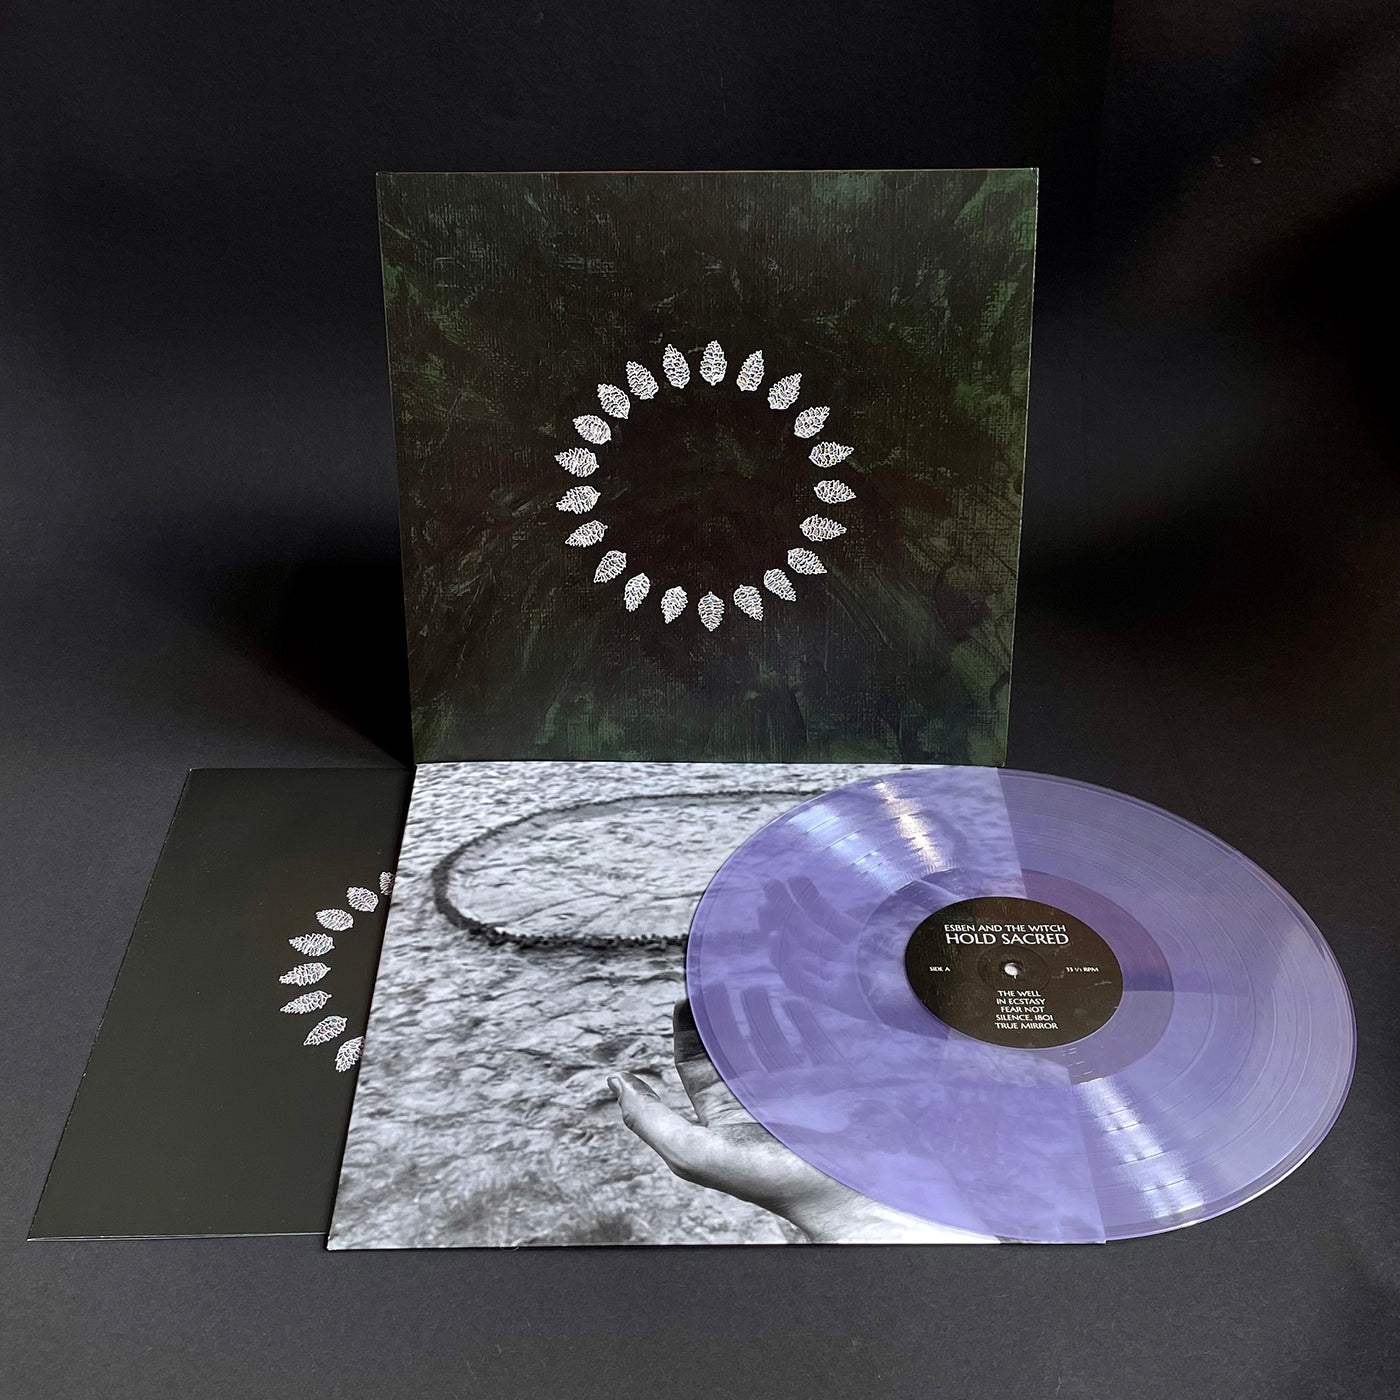 "Hold Sacred" Limited Edition Amethyst LP